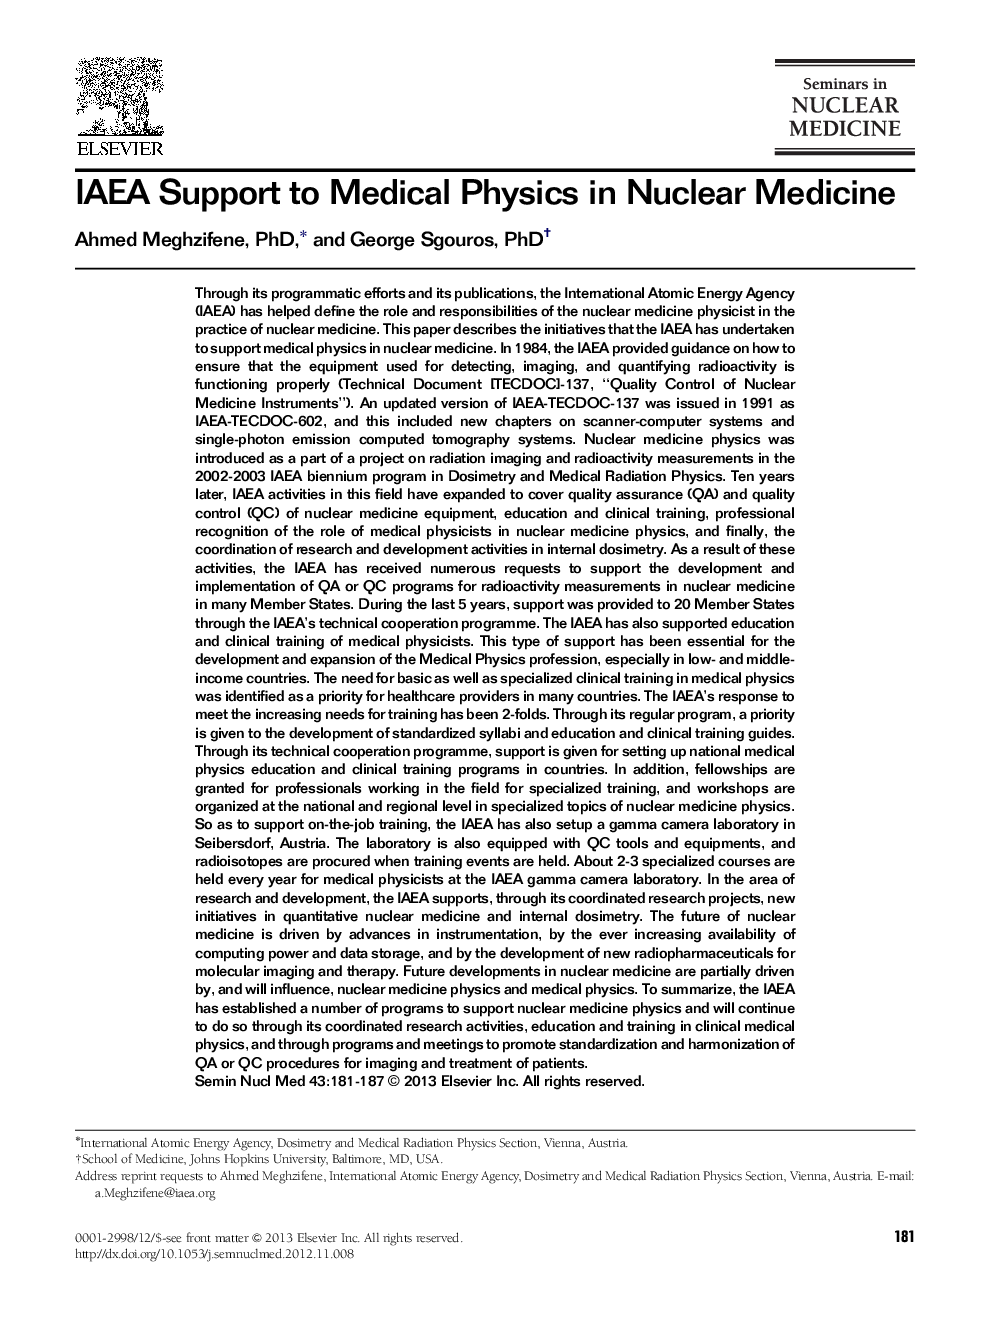 IAEA Support to Medical Physics in Nuclear Medicine